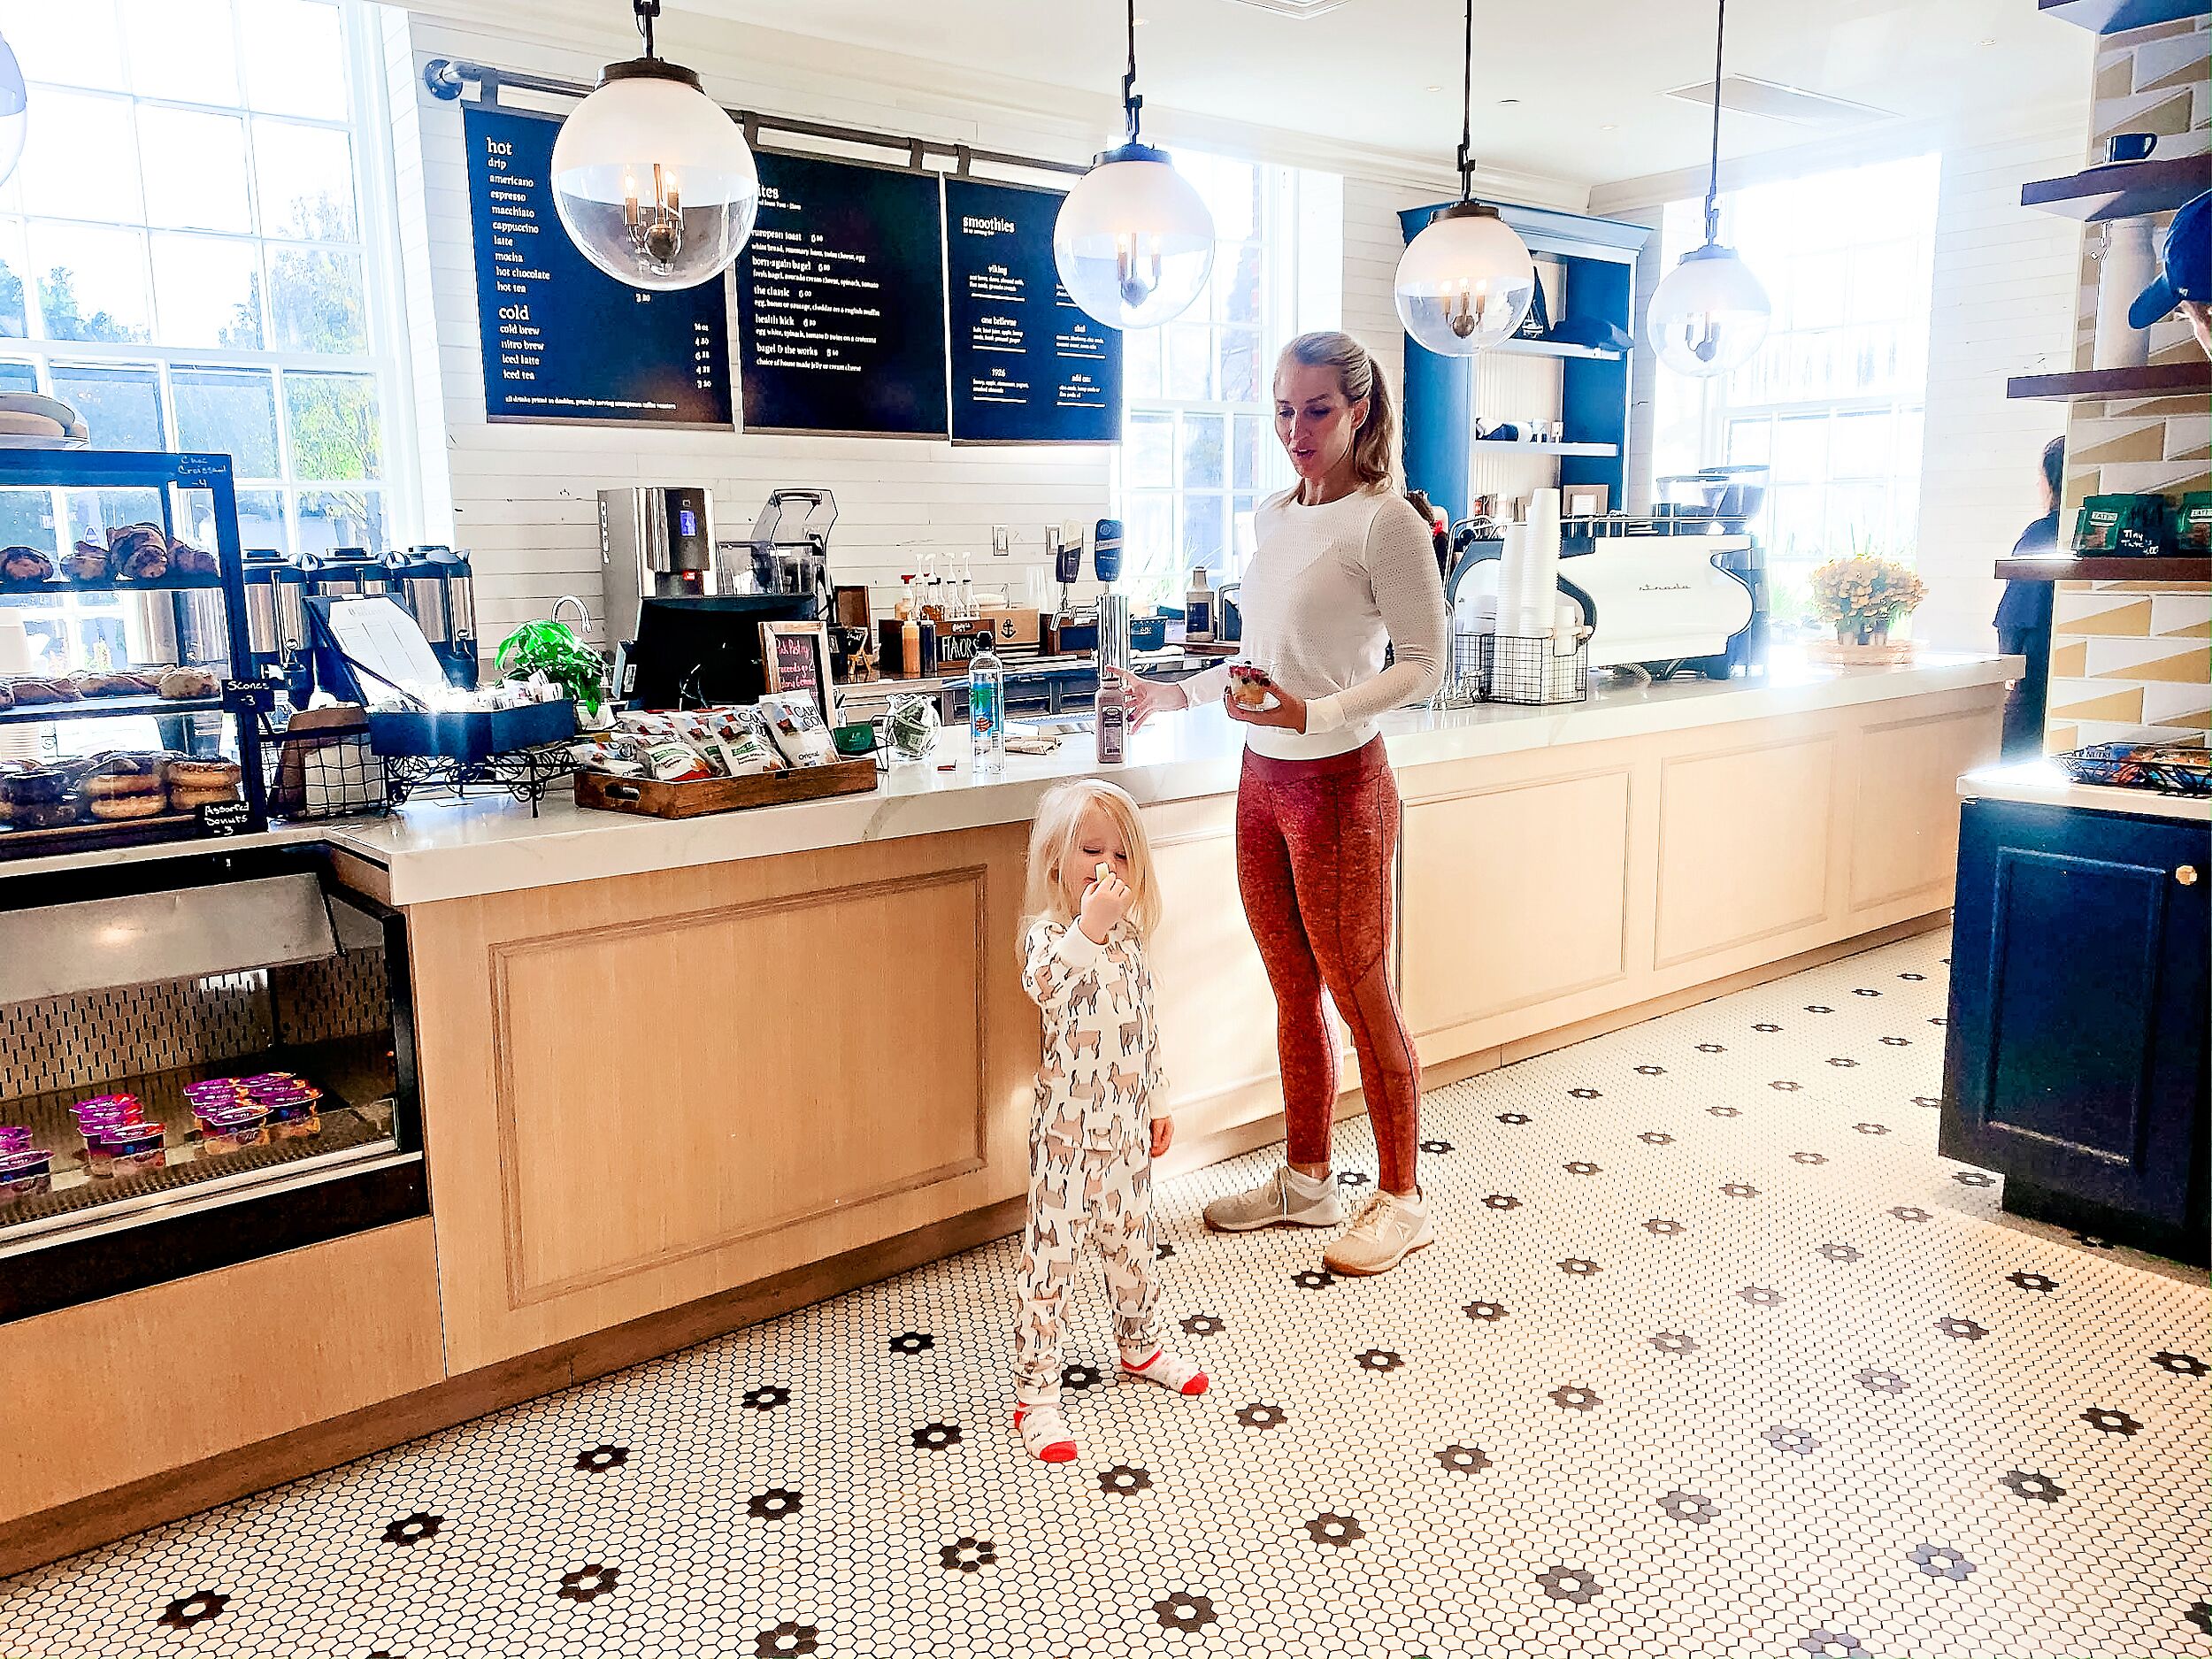 Heading to Newport Rhode Island soon with your family? Popular Atlanta Blogger Happily Hughes is sharing what to see, eat and do with this Newport Rhode Island Family Travel Guide here!